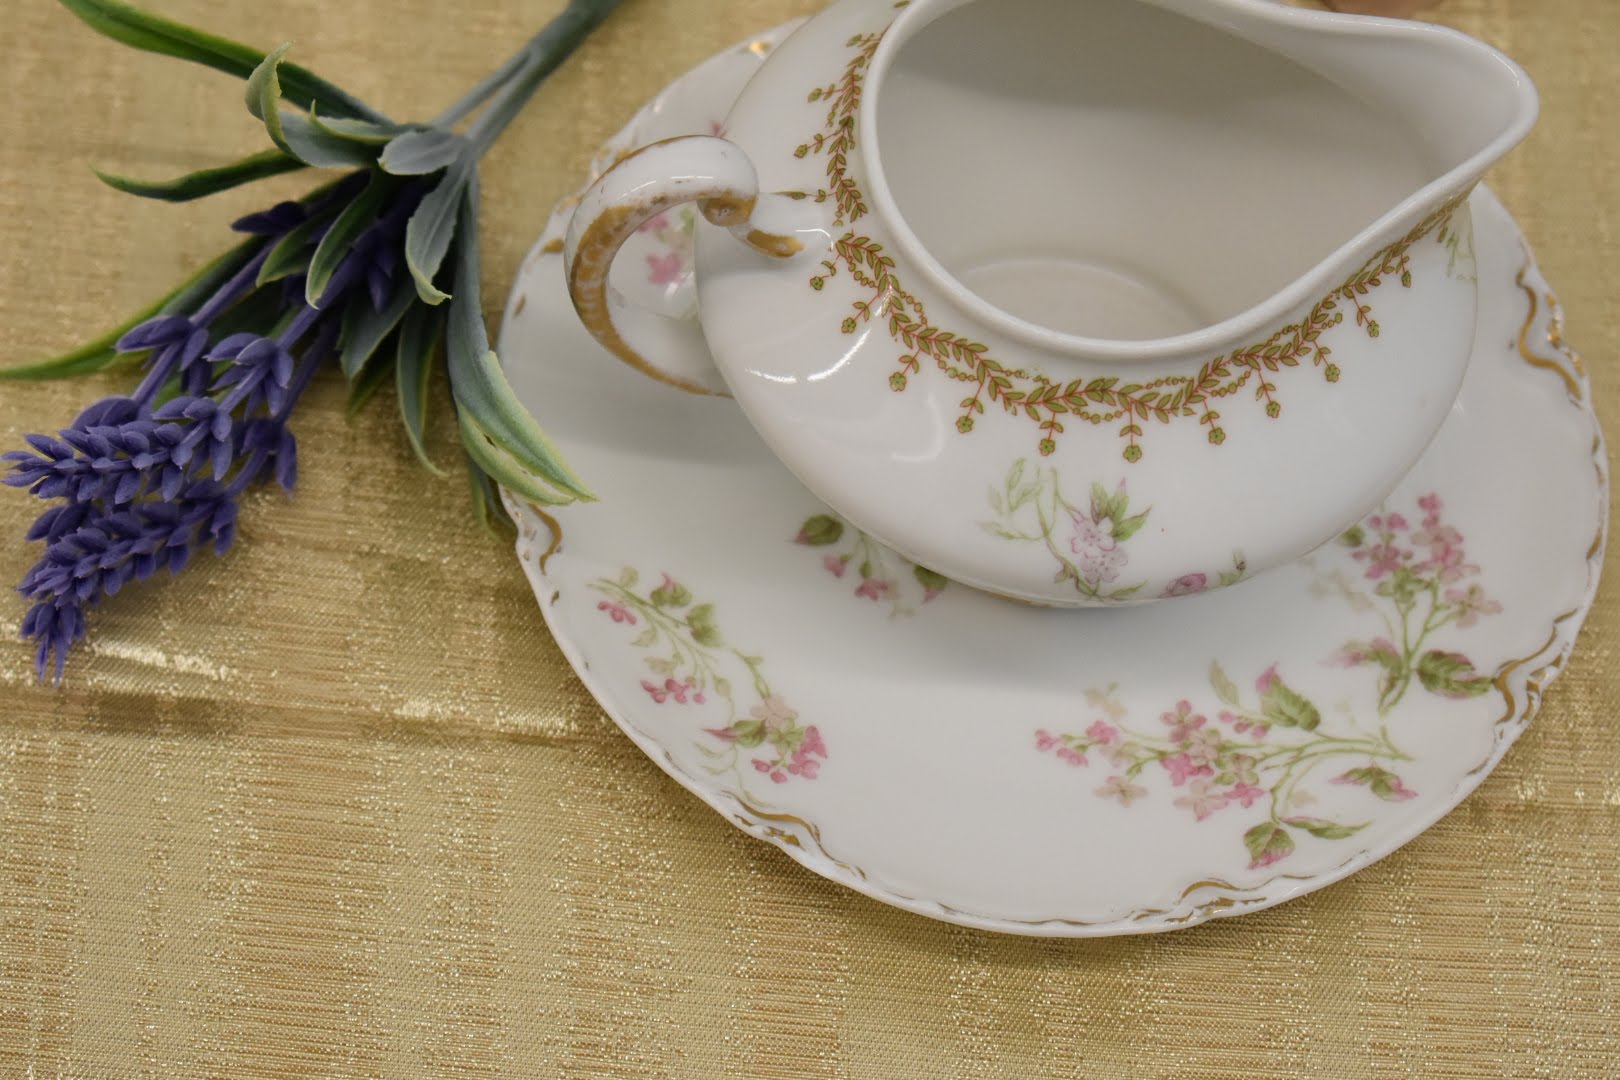 Limoges Haviland - Fine Porcelain China - Cookie Plates And Creamer - Pink Floral Pattern With Gold Trim - From France